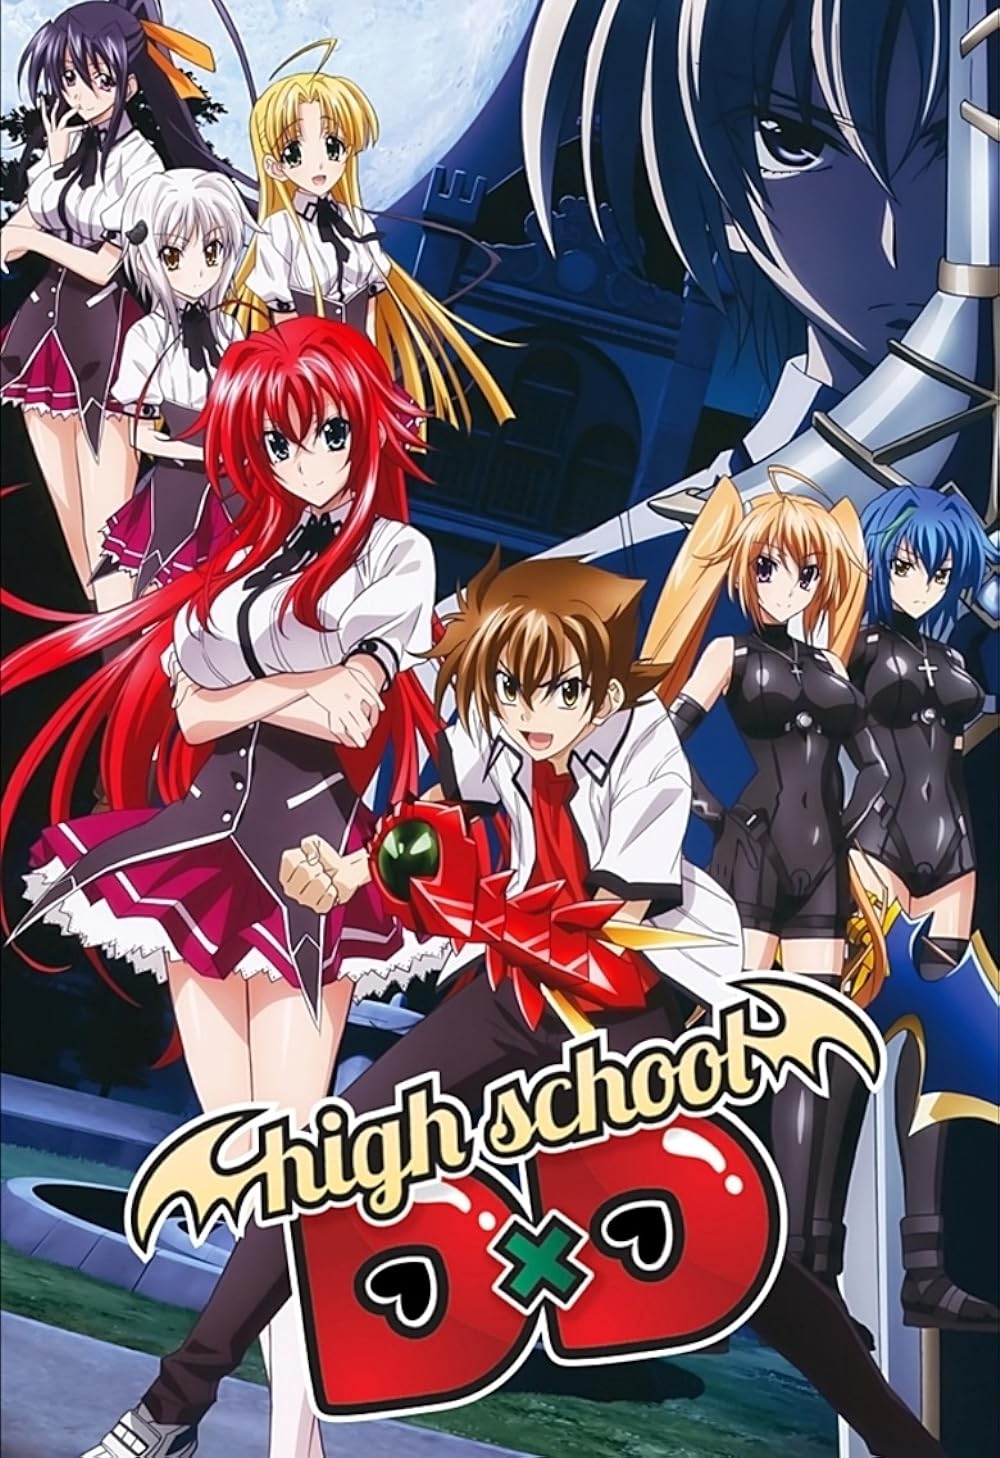 highschool dxd characters